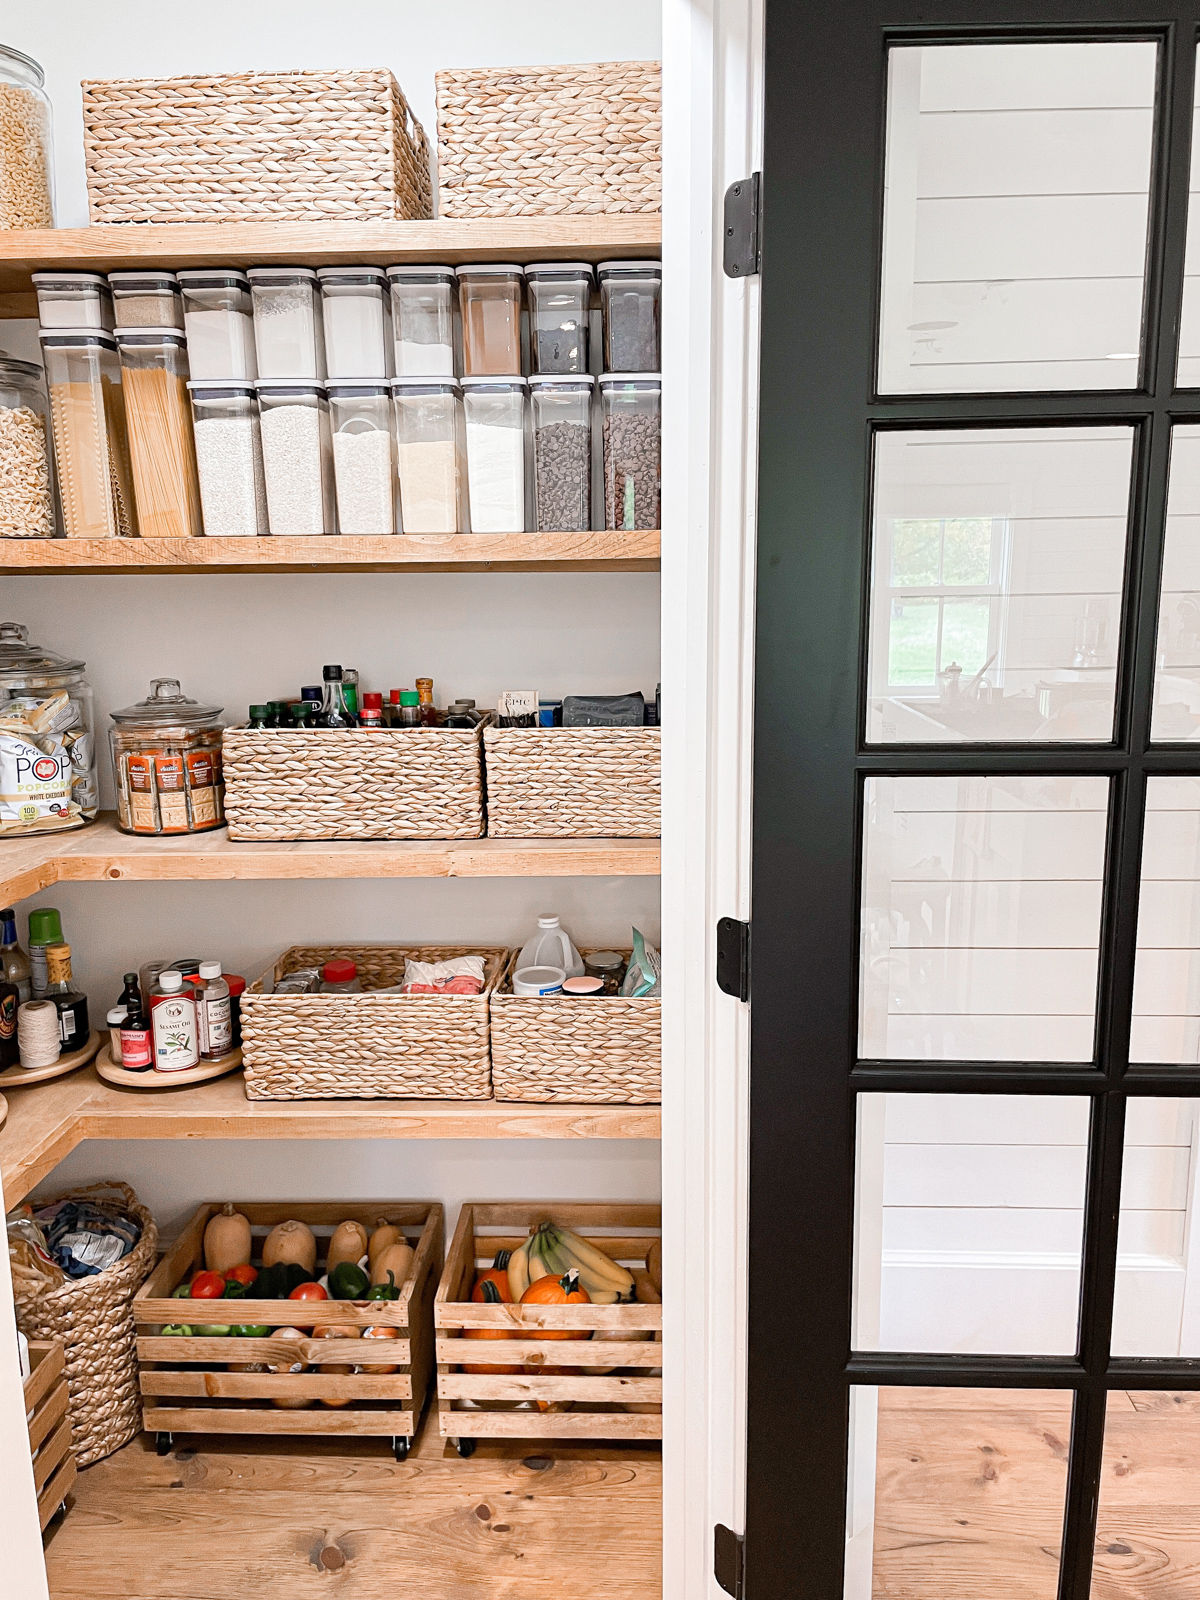 Pantry with stained shelves